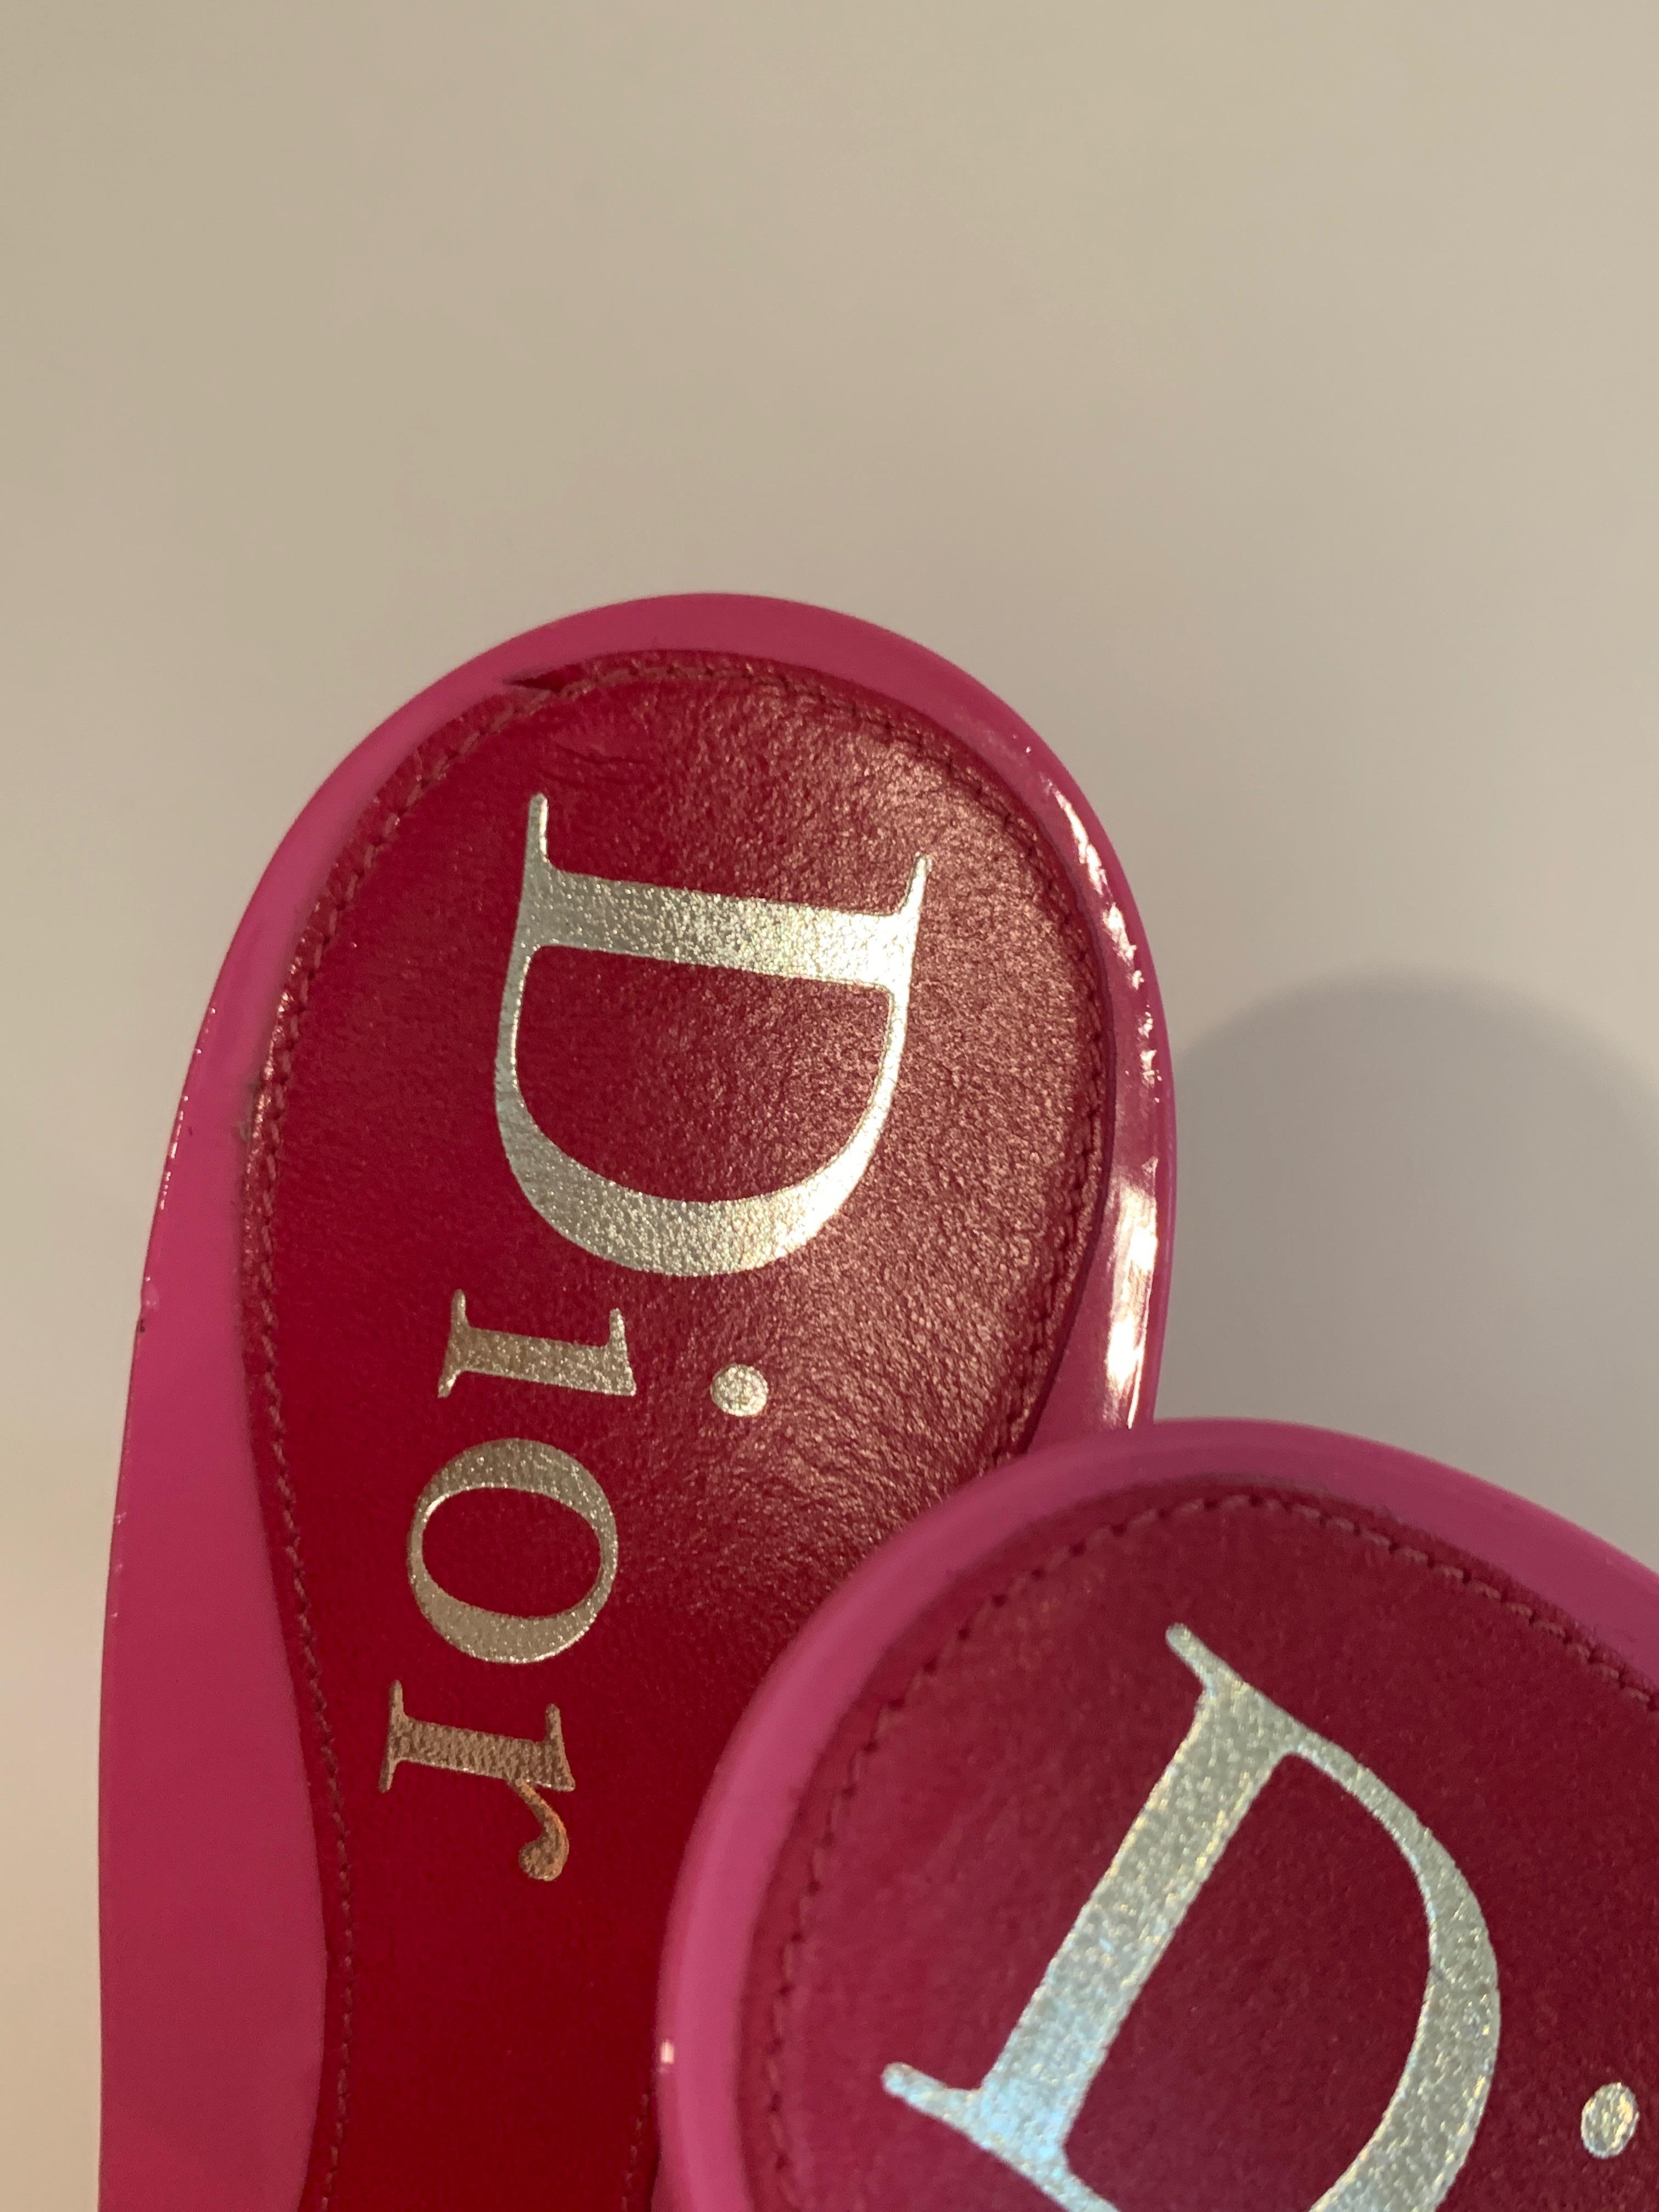 Dior Logo Pink and Yellow Resin and PVC High Heel Sandals Shoes 2